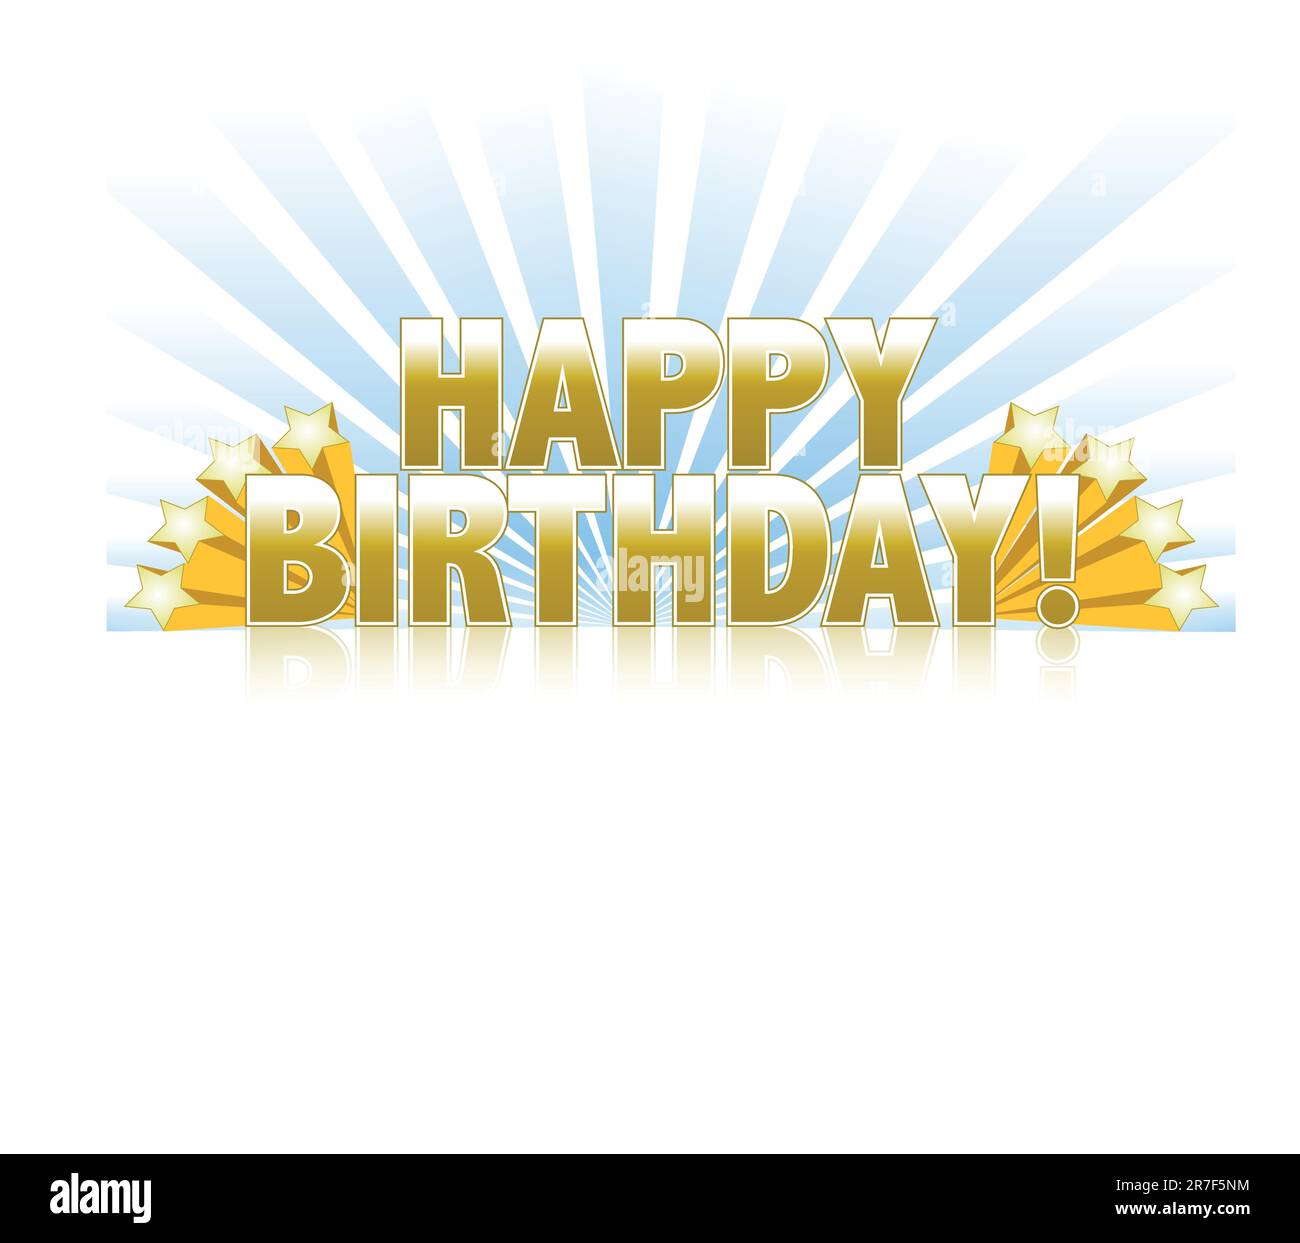 Happy birthday logo sign with golden stars and rays of light Stock Vector